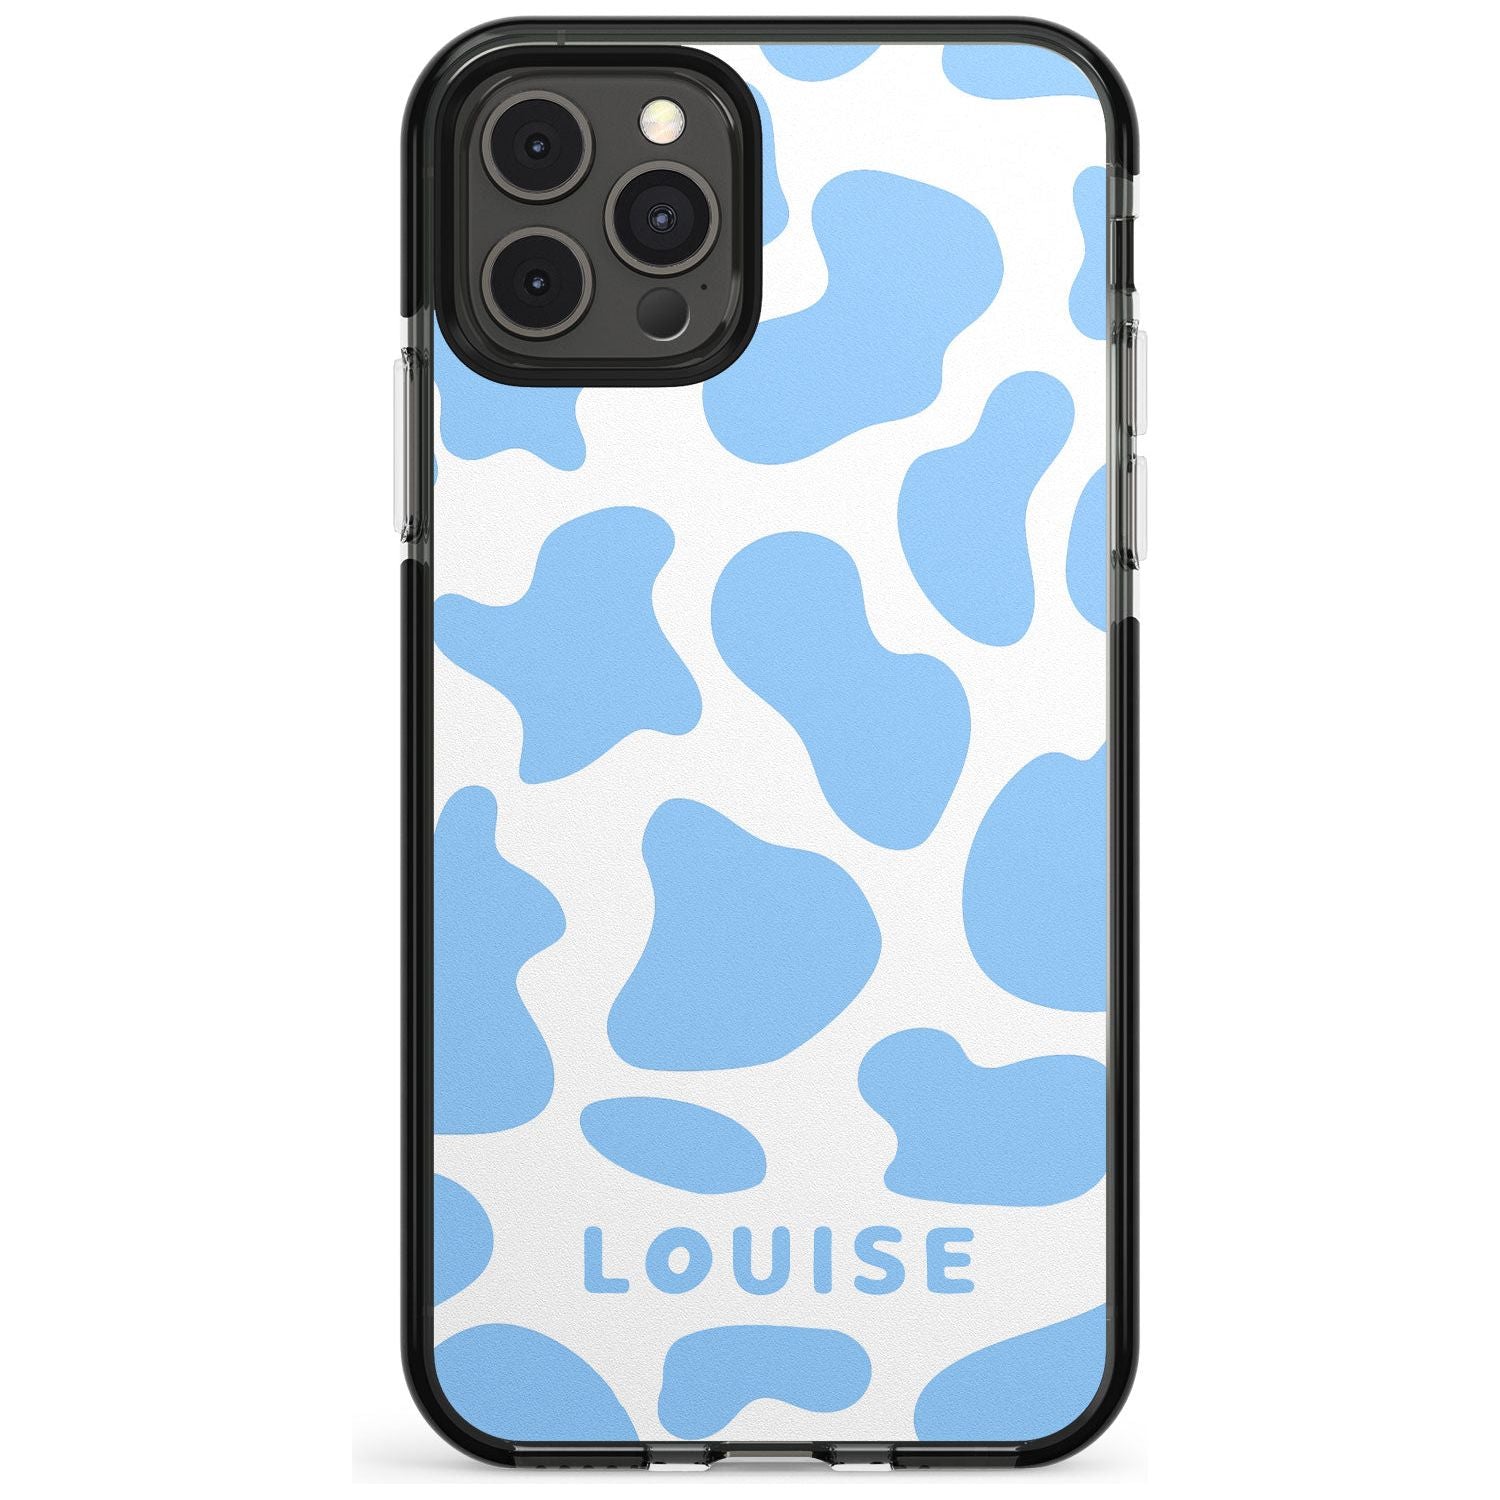 Personalised Blue and White Cow Print Black Impact Phone Case for iPhone 11